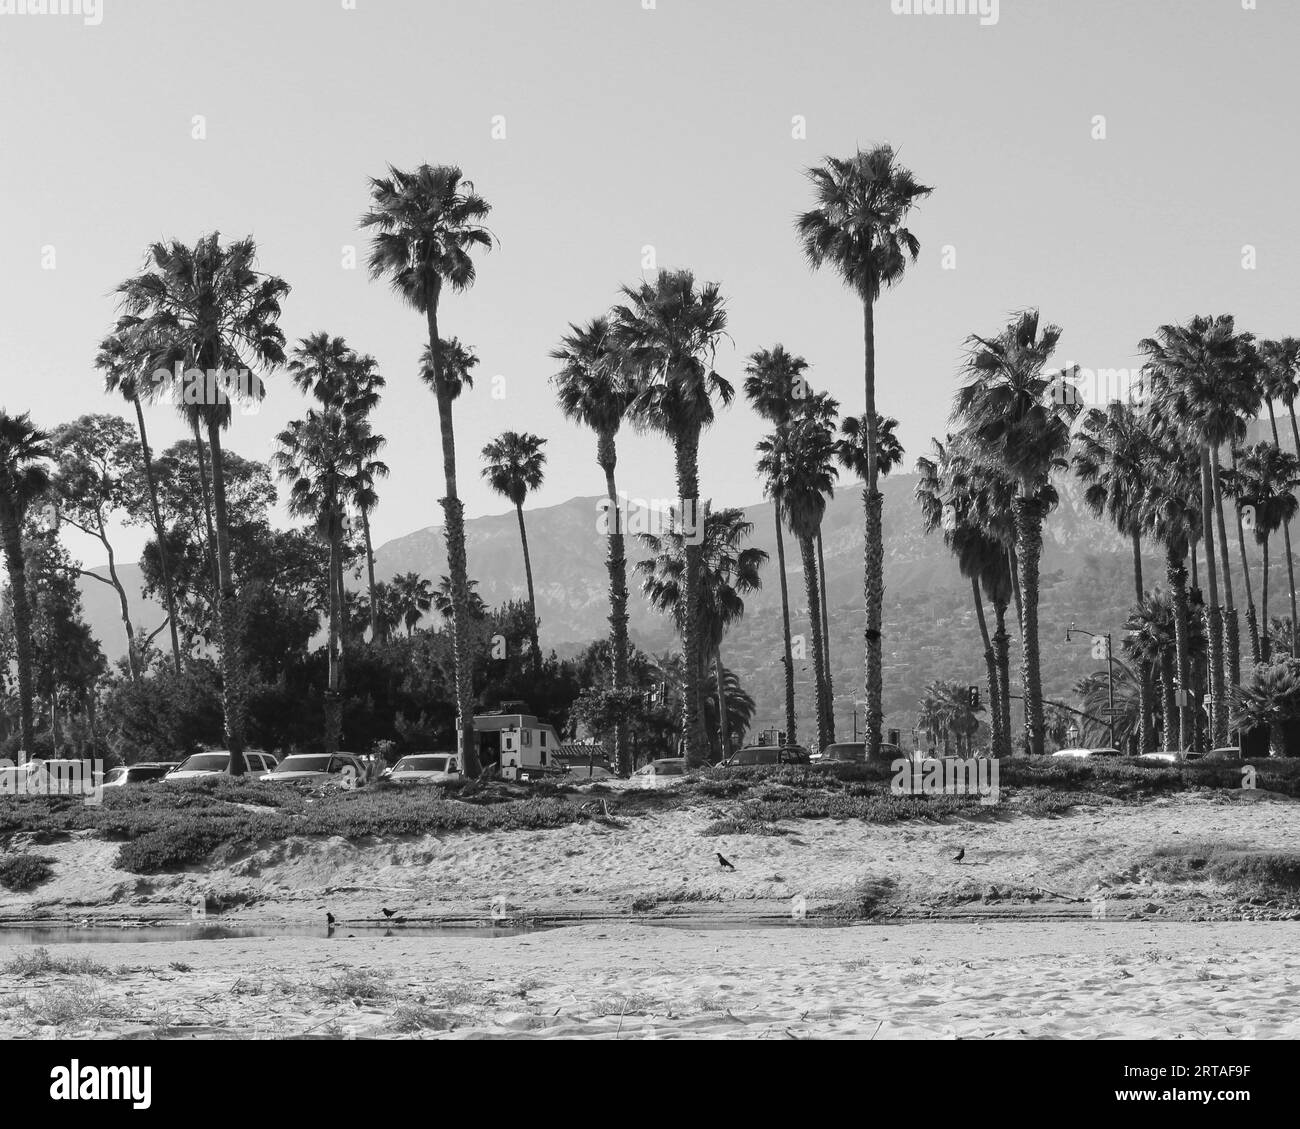 palm trees on the beach, Palm trees along the Santa Barbara beach in black and white Stock Photo